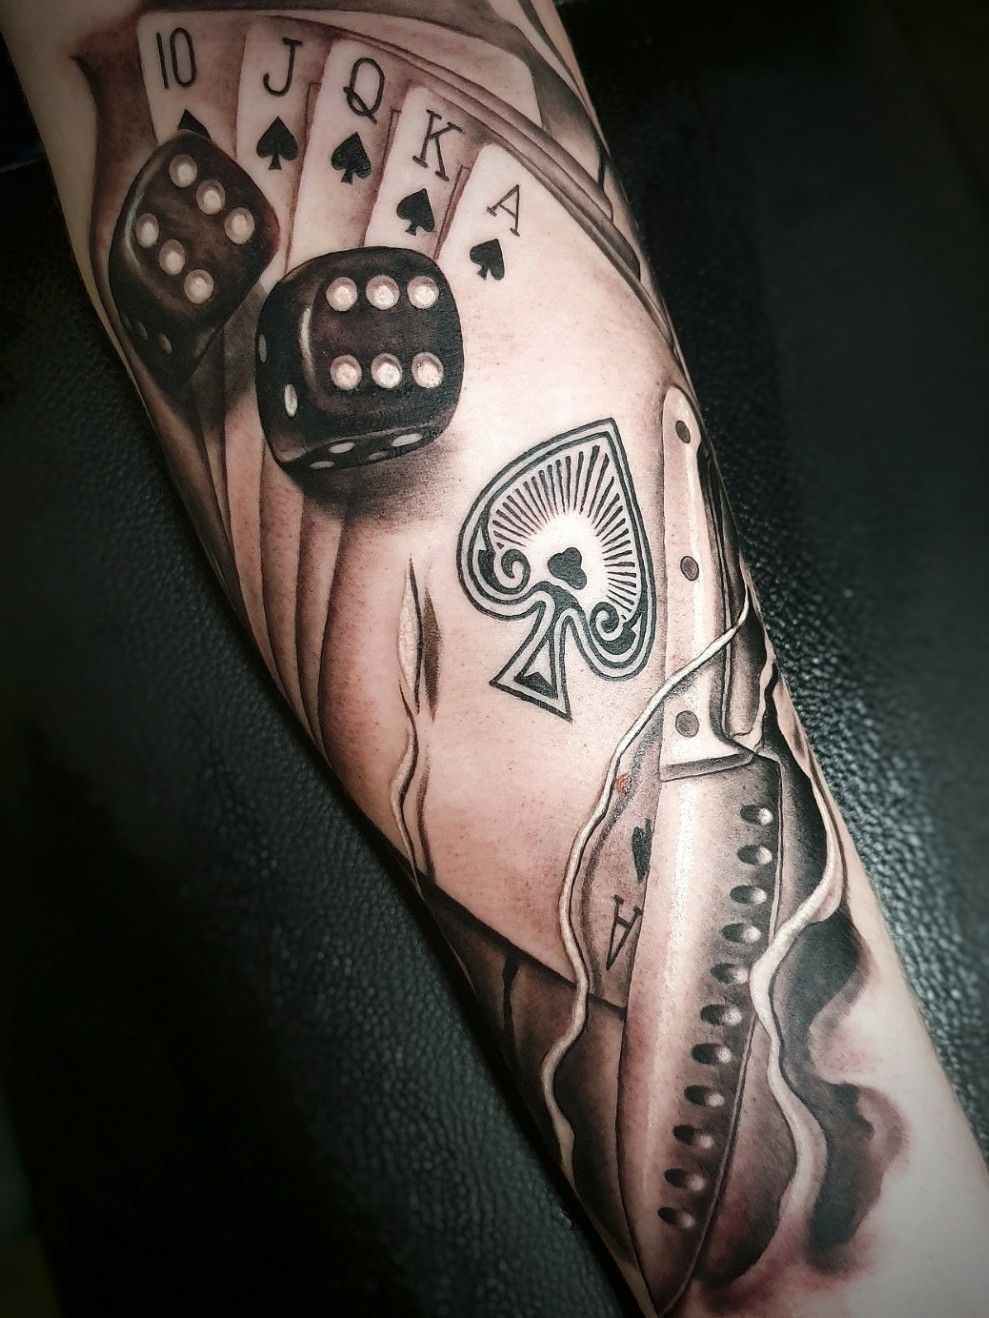 Meaning of dice tattoo and astonish ideas